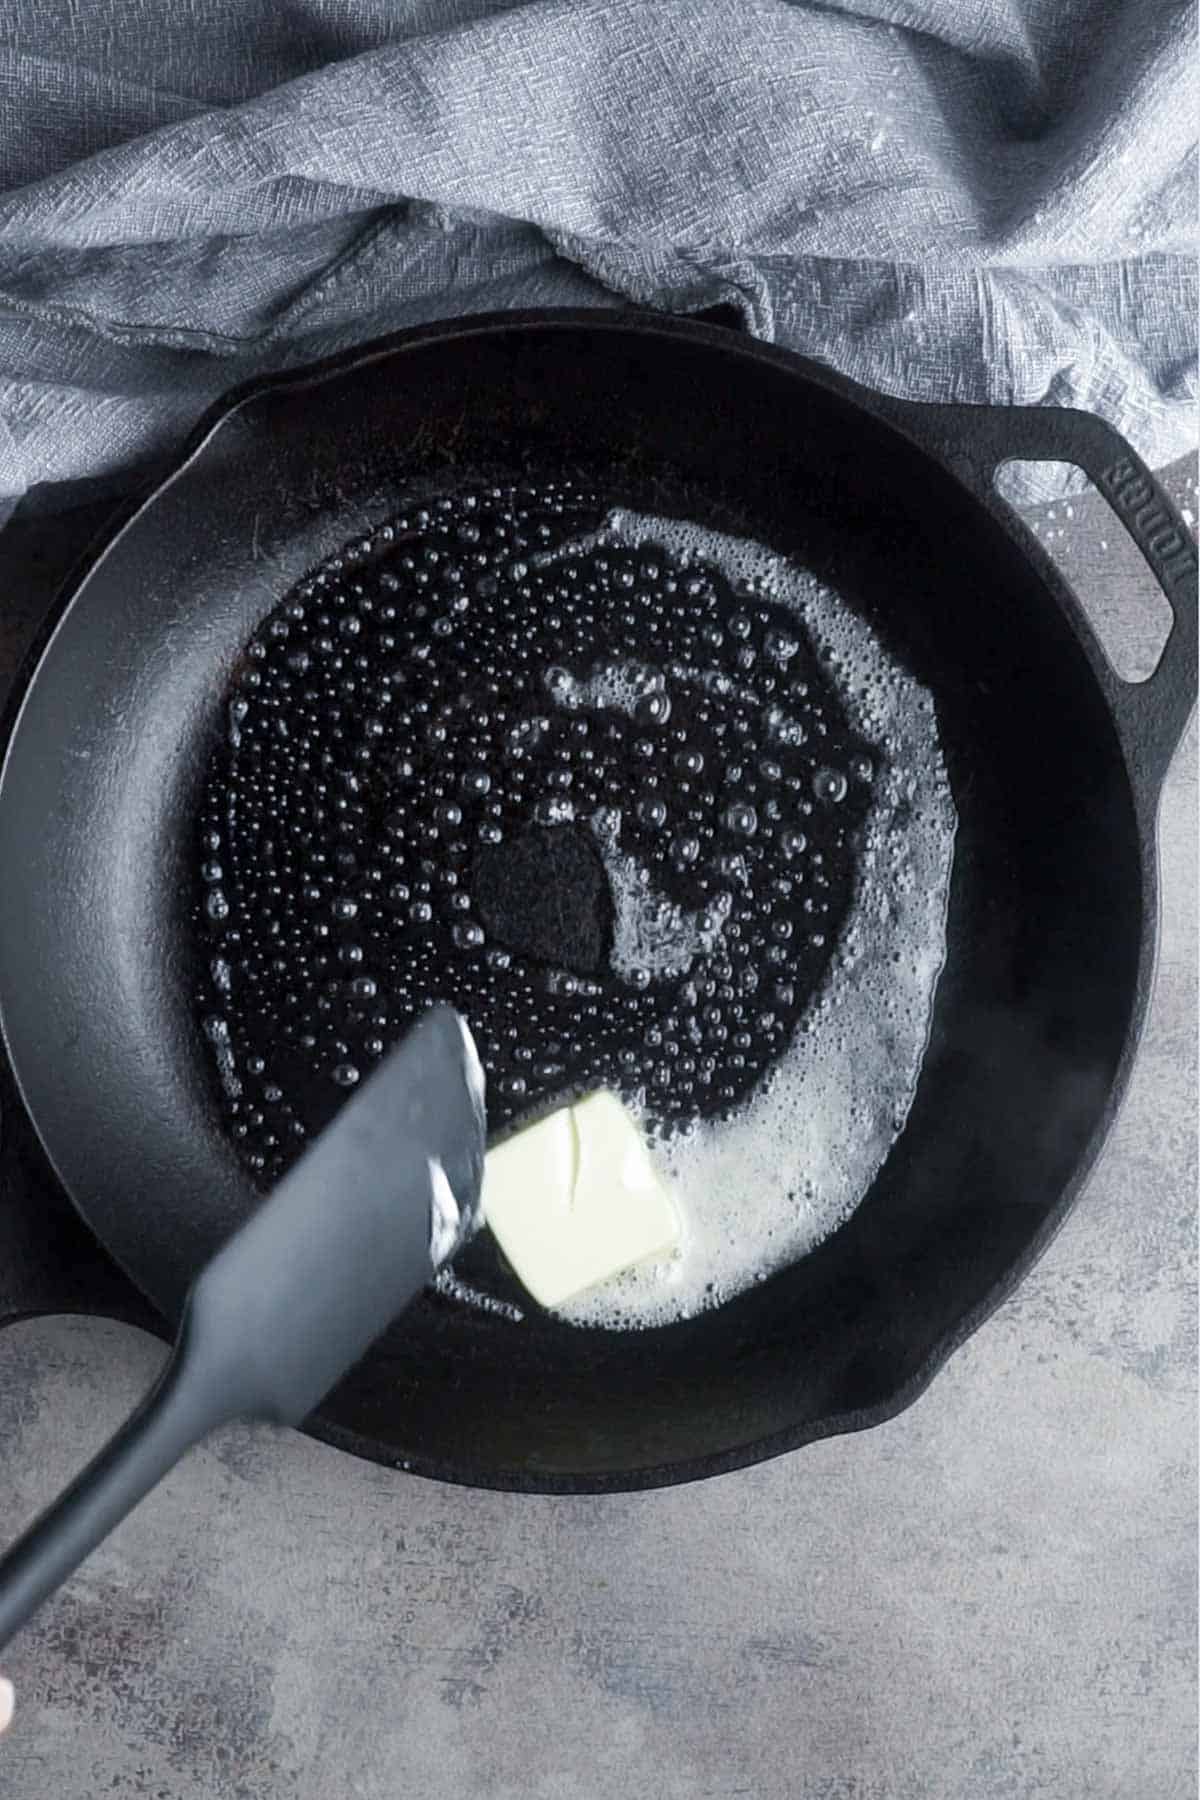 butter melts in hot cast iron skillet